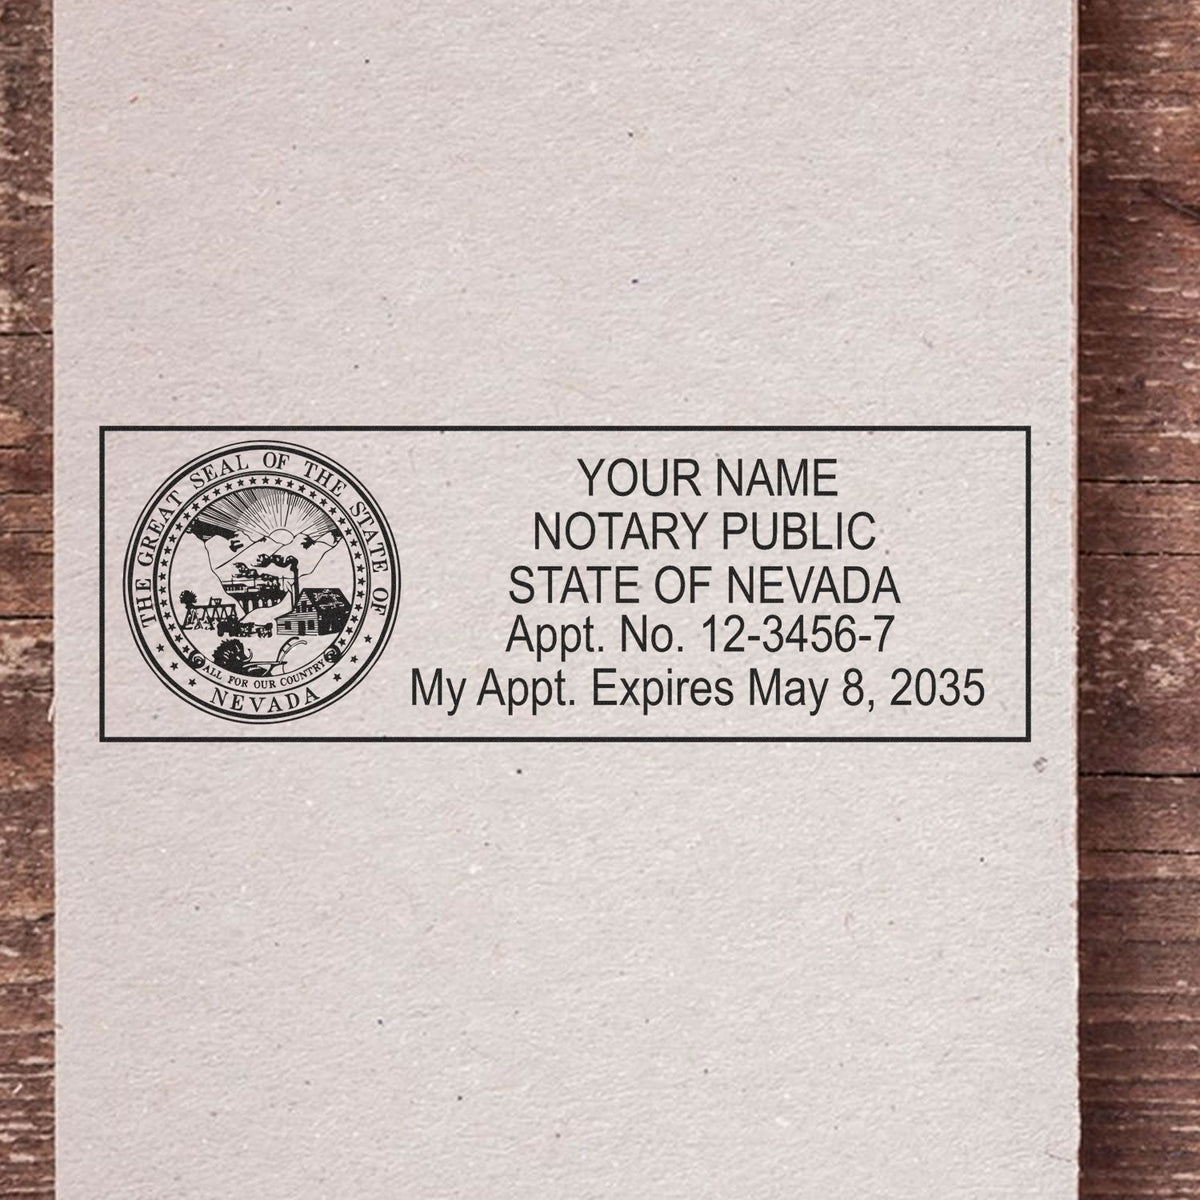 The Slim Pre-Inked State Seal Notary Stamp for Nevada stamp impression comes to life with a crisp, detailed photo on paper - showcasing true professional quality.